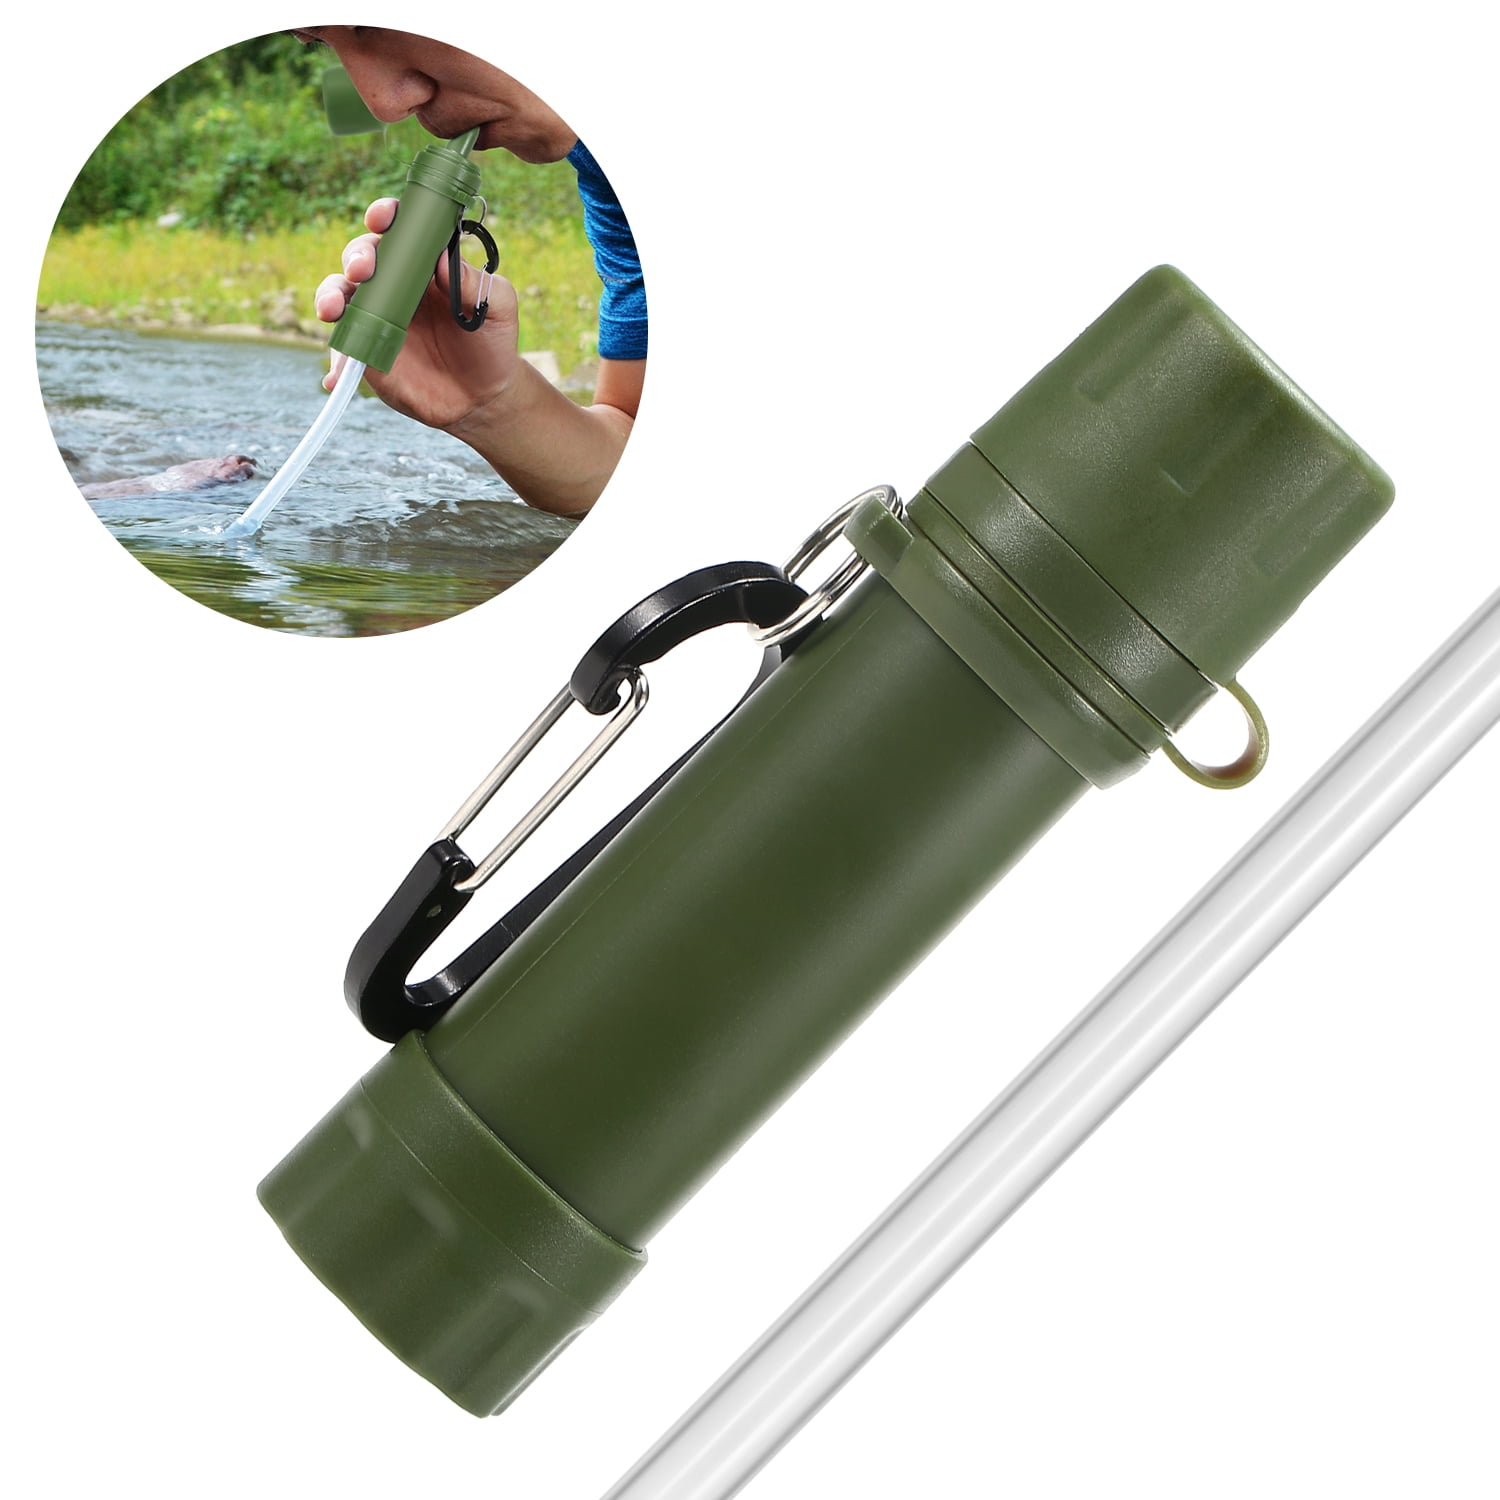 Portable Water Filter Straw Purifier Camping Emergency Gear Survival Tool Blue 